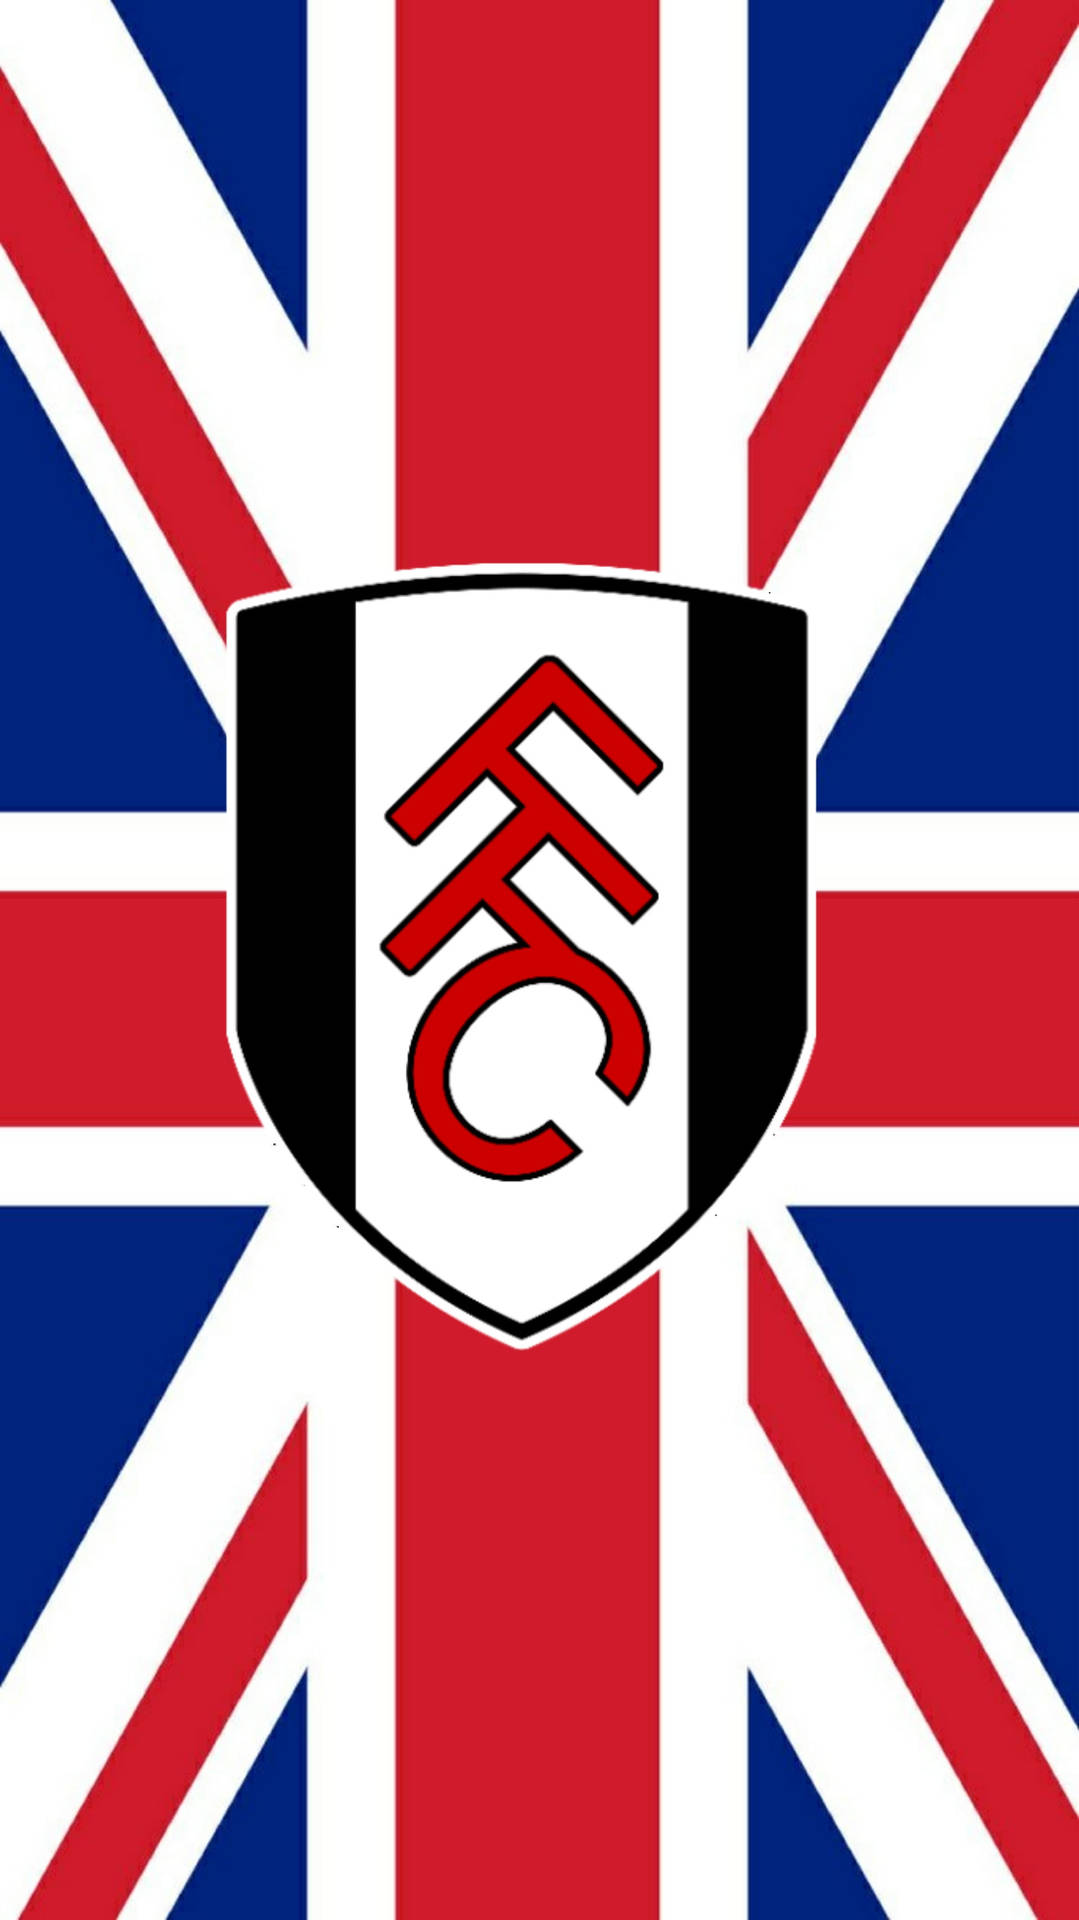 Fulhamfc Union Jack Can Be Translated To 